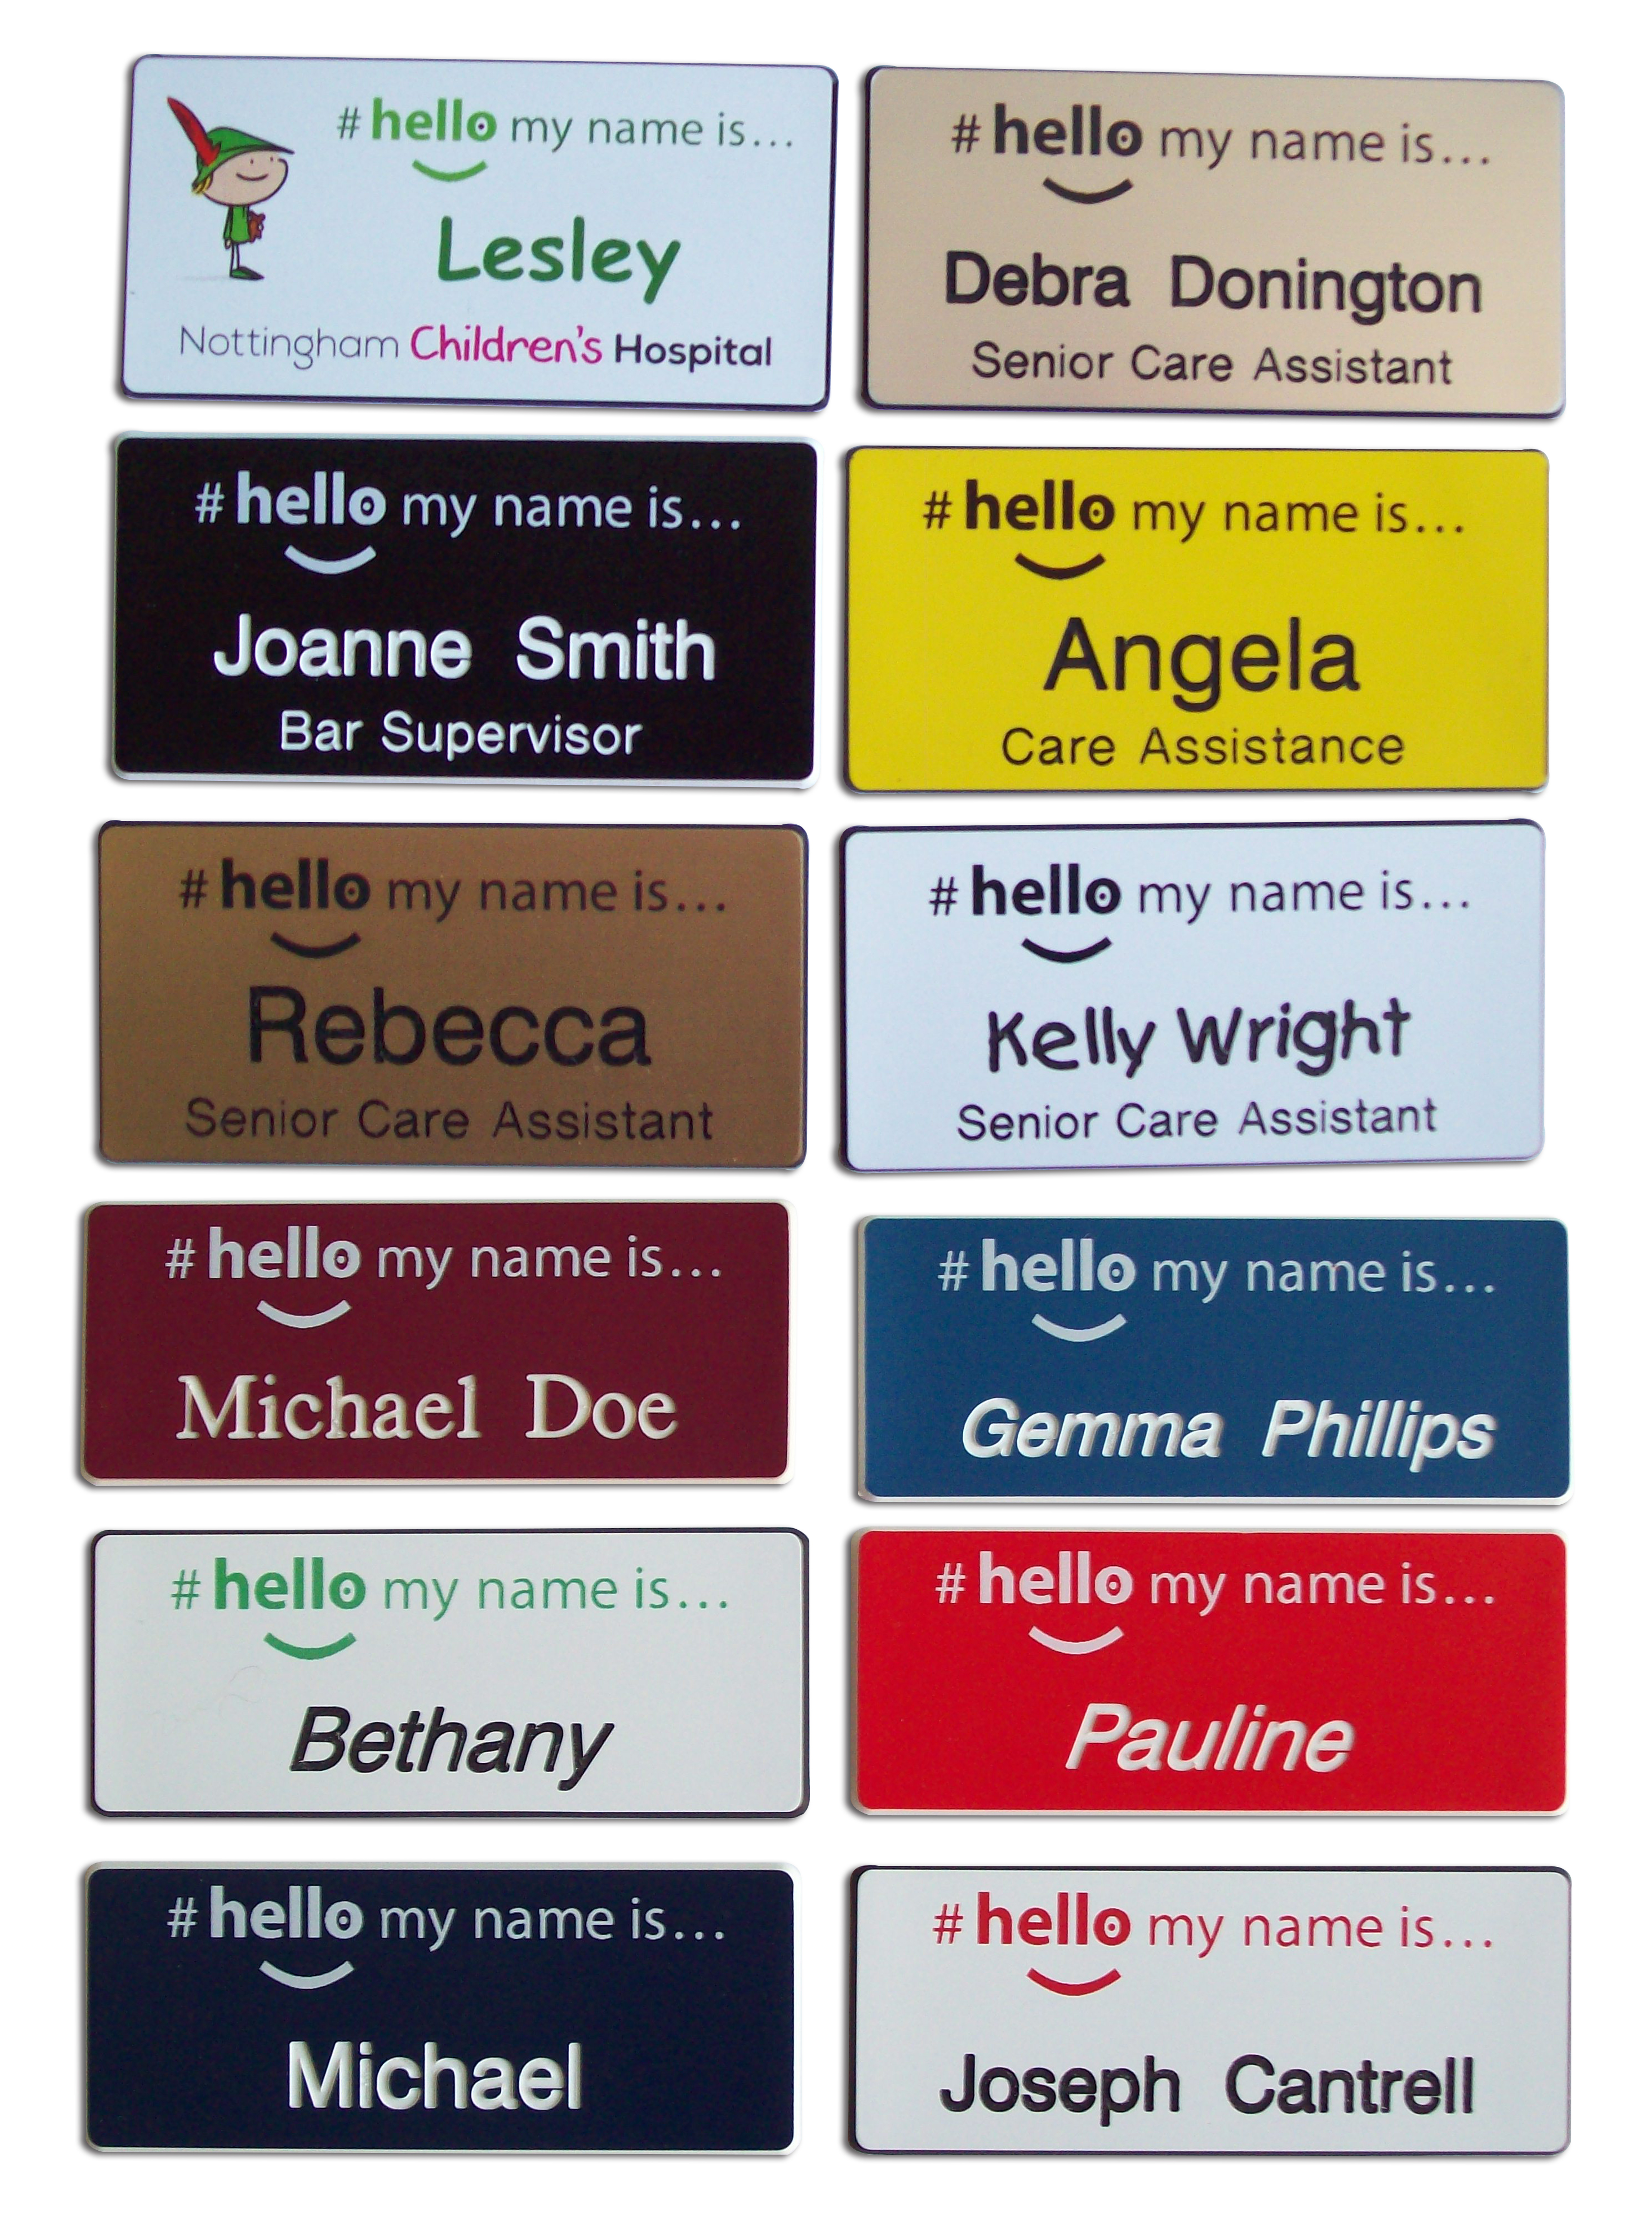 Hello my name is... badges